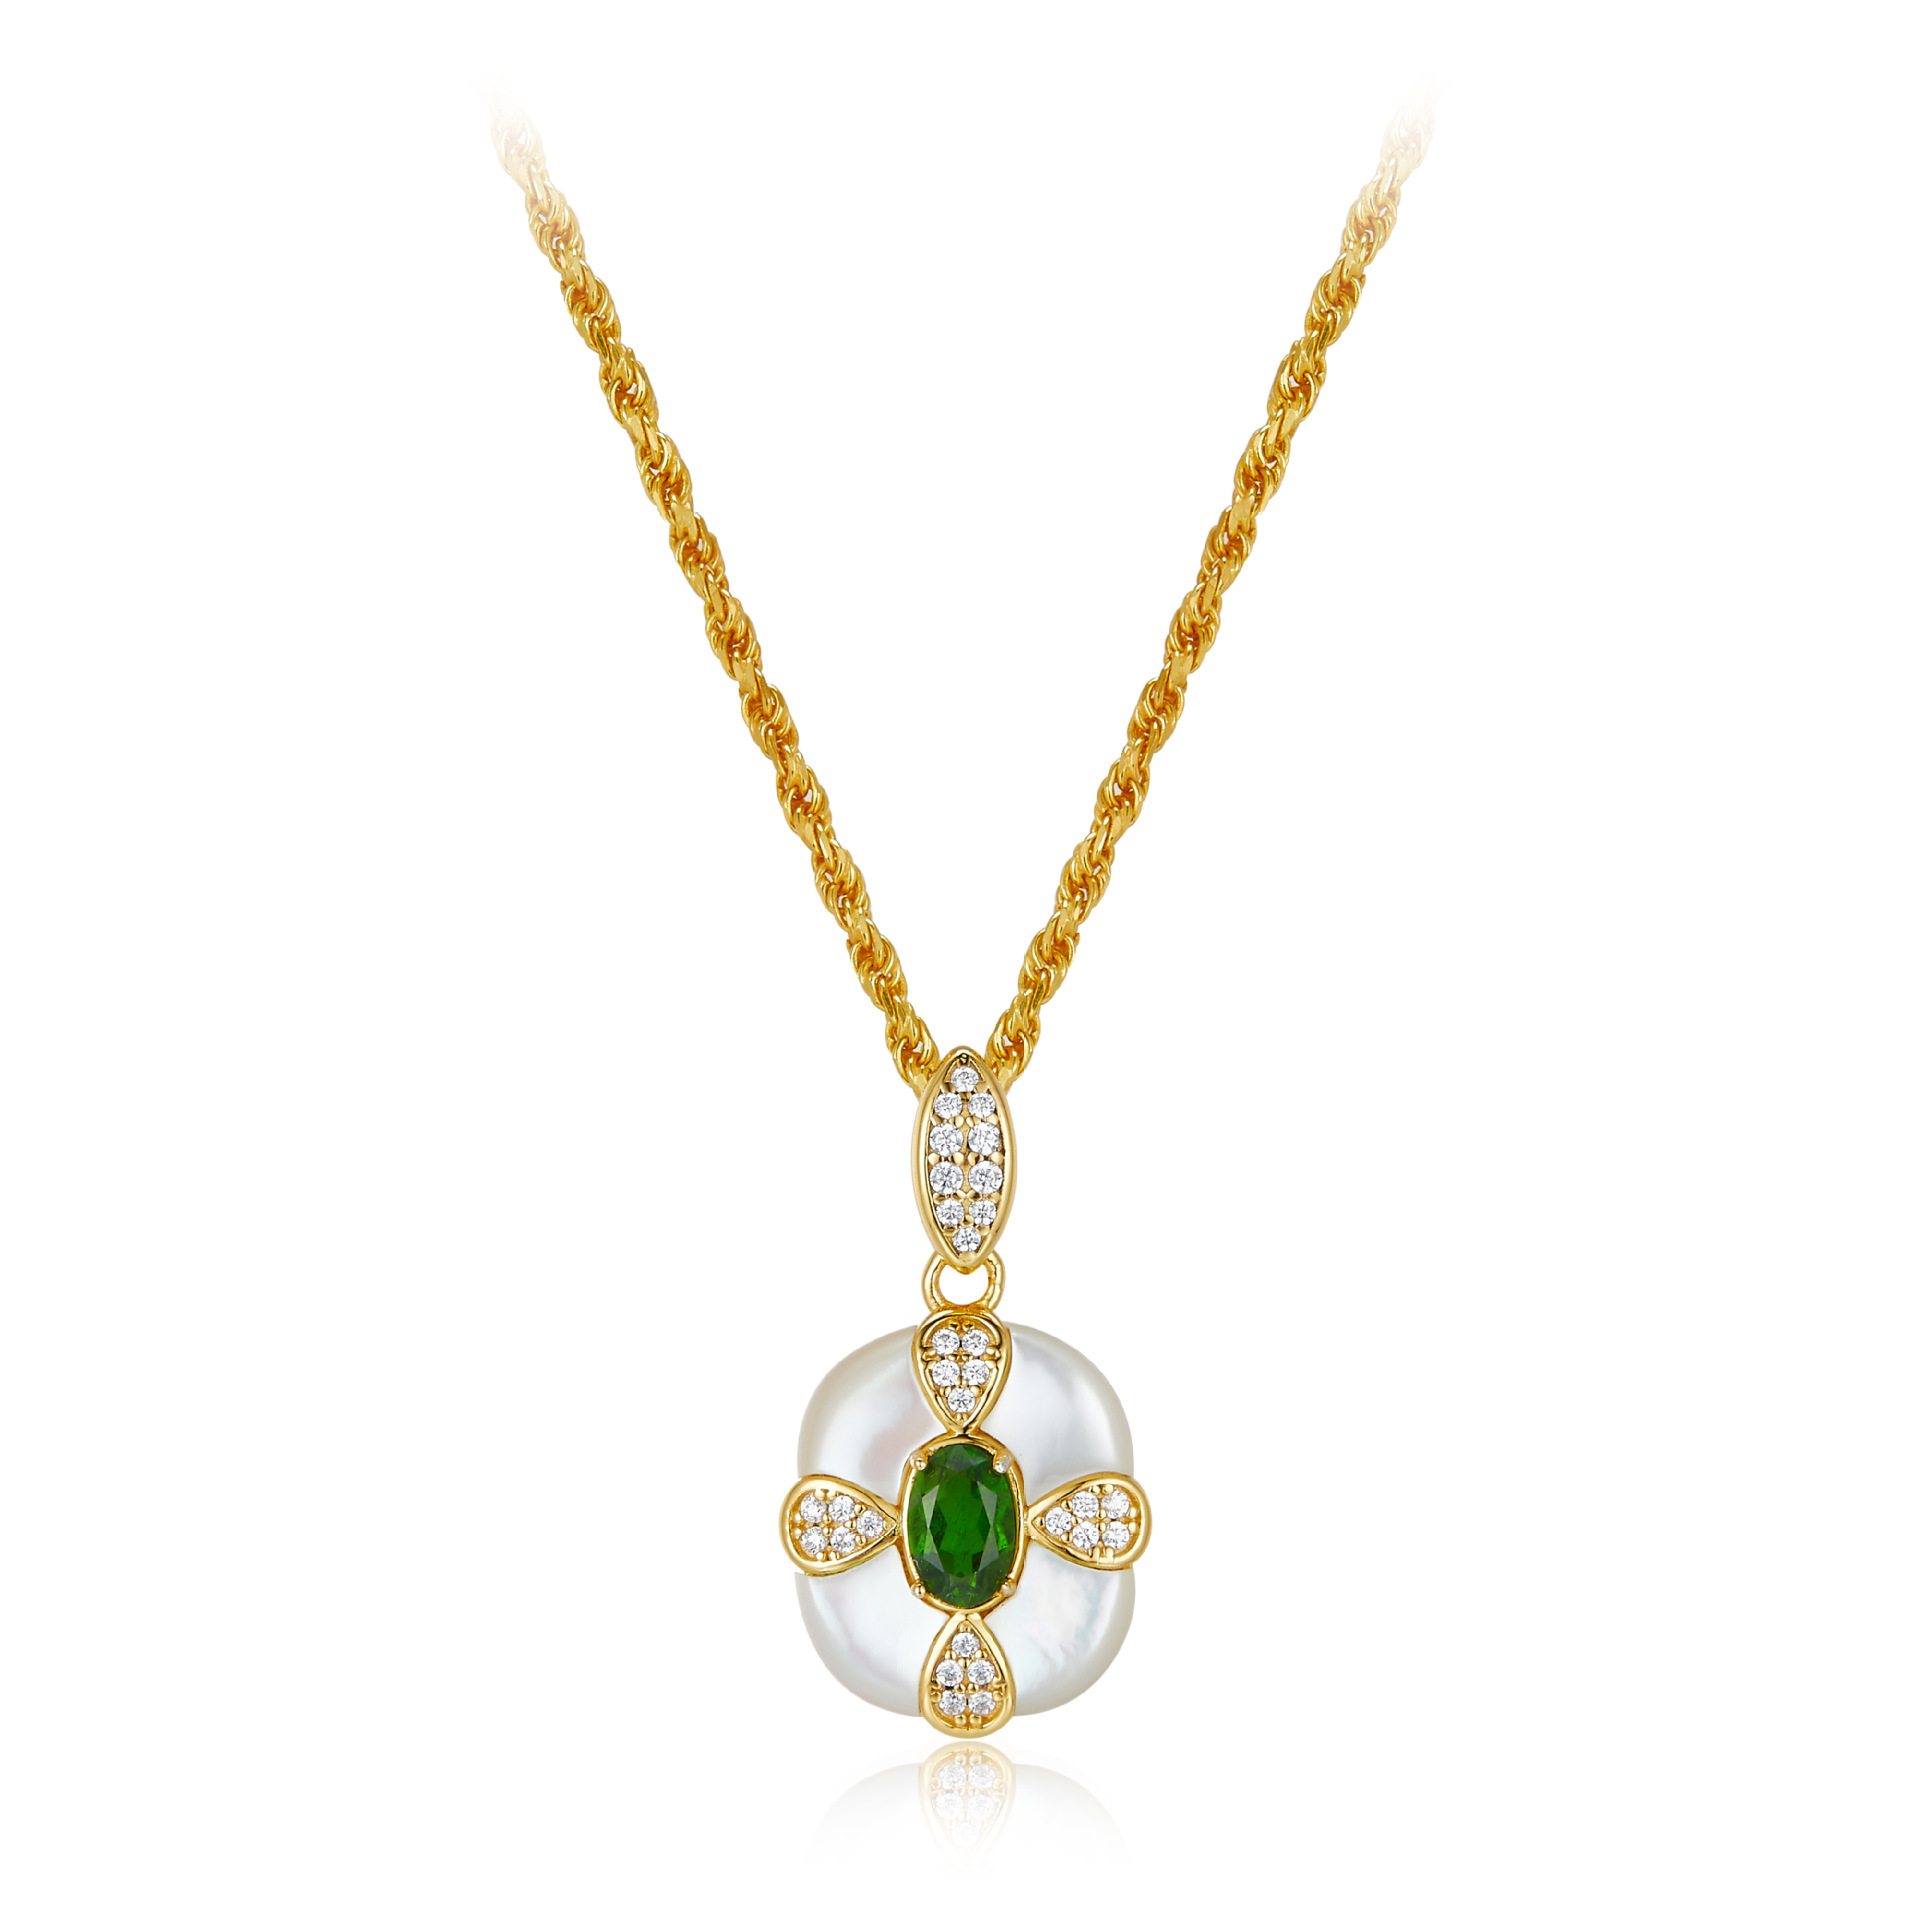 Royal Design 925 Silver And White Mother-of-Pearl Diopside Necklace-BlingRunway